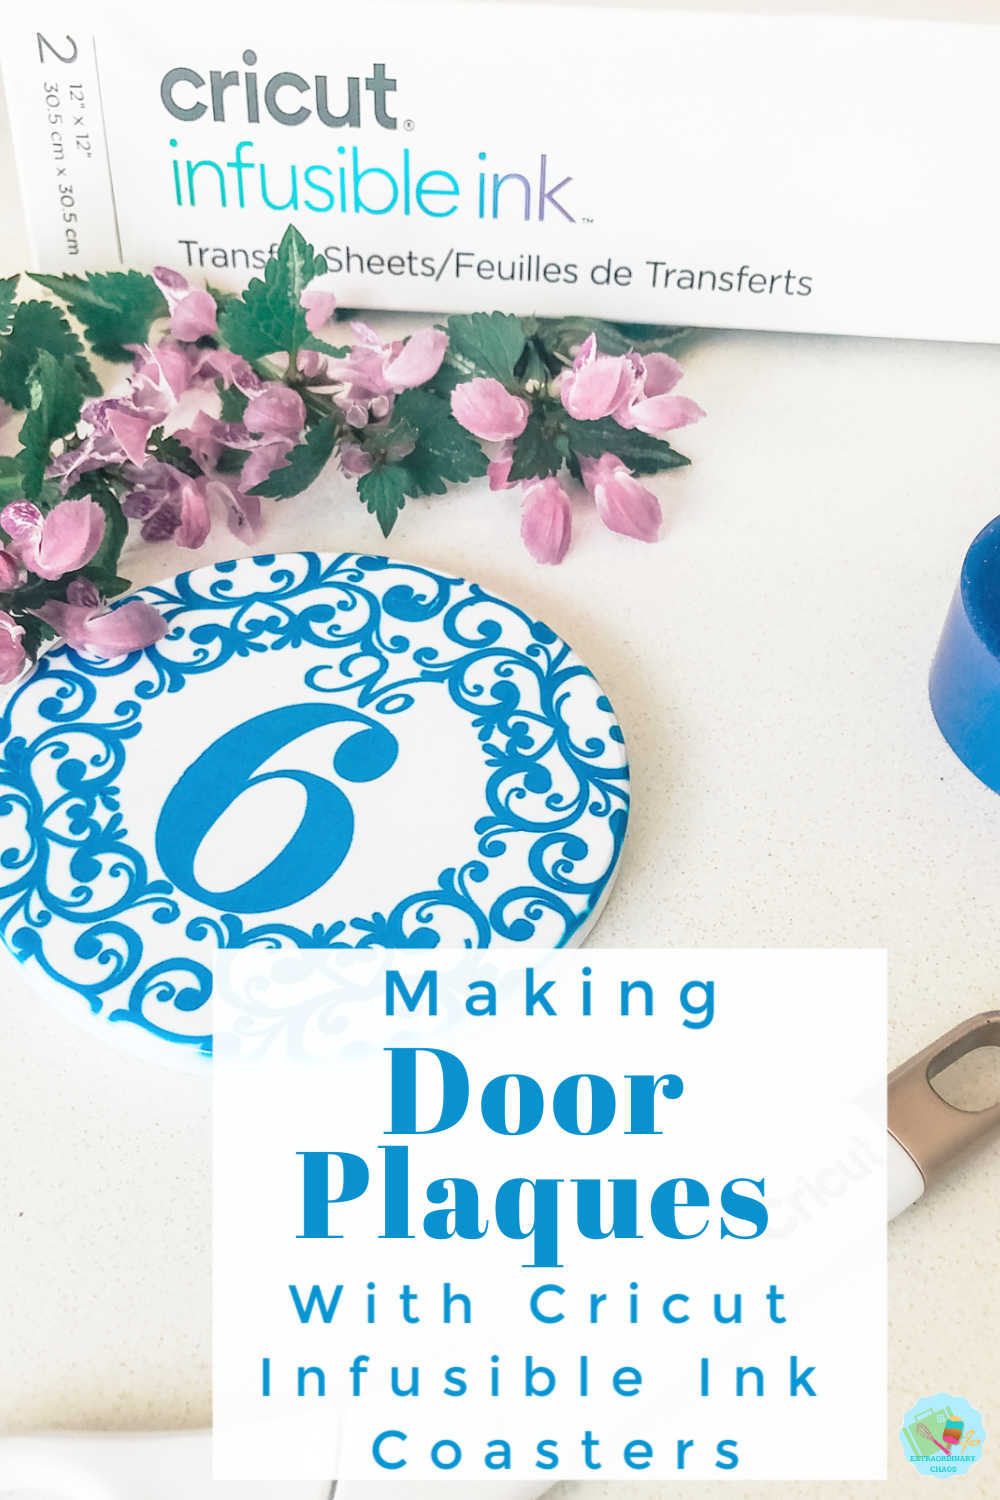 Making Door Plaques out of ceramic infusible ink coasters, Cricut products to make and sell for customers looking for door numbers